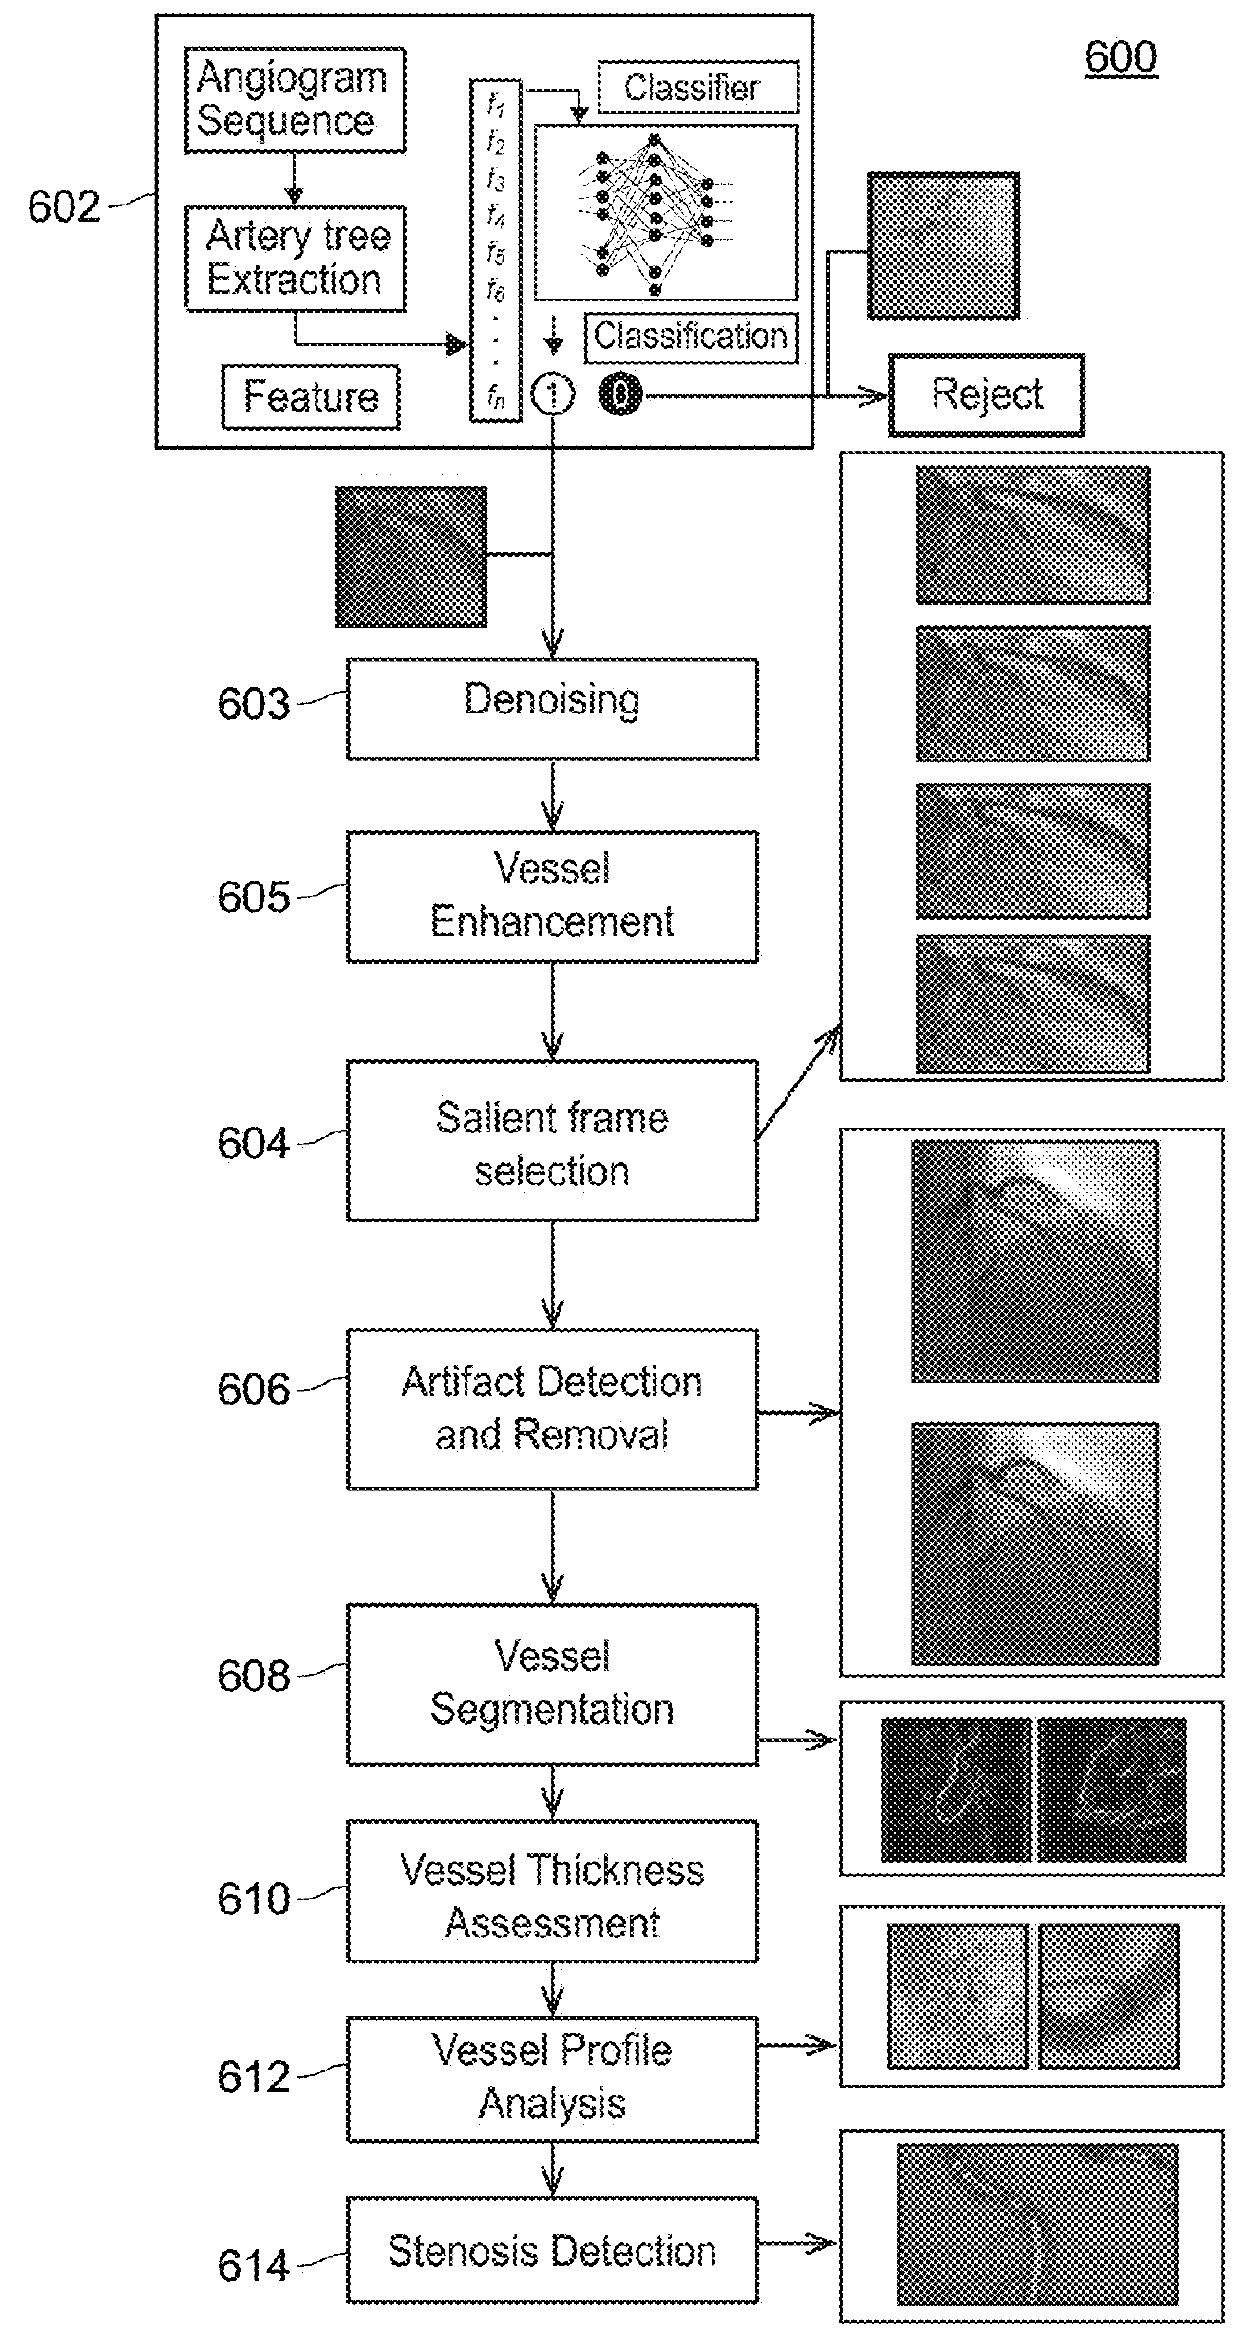 Automated analysis of vasculature in coronary angiograms